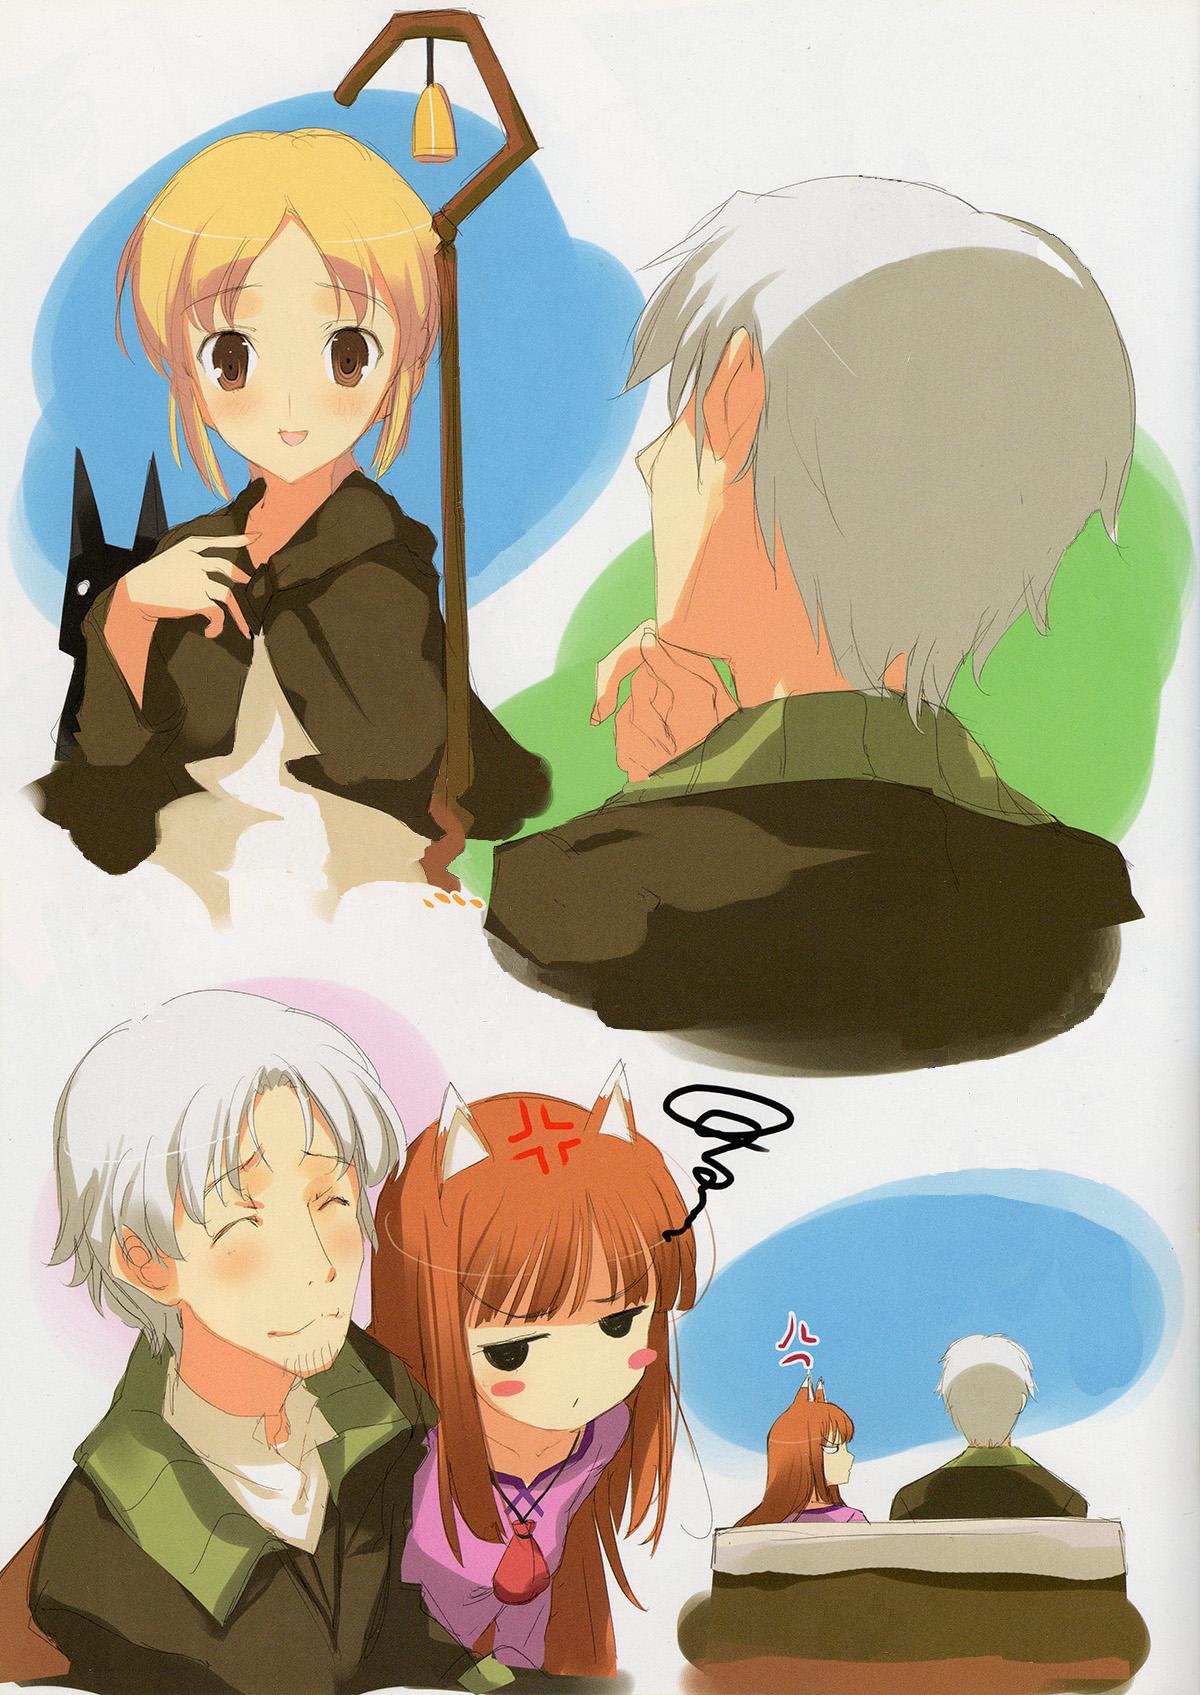 Verga Ookami no Kimagure Hon - Spice and wolf Booty - Page 4